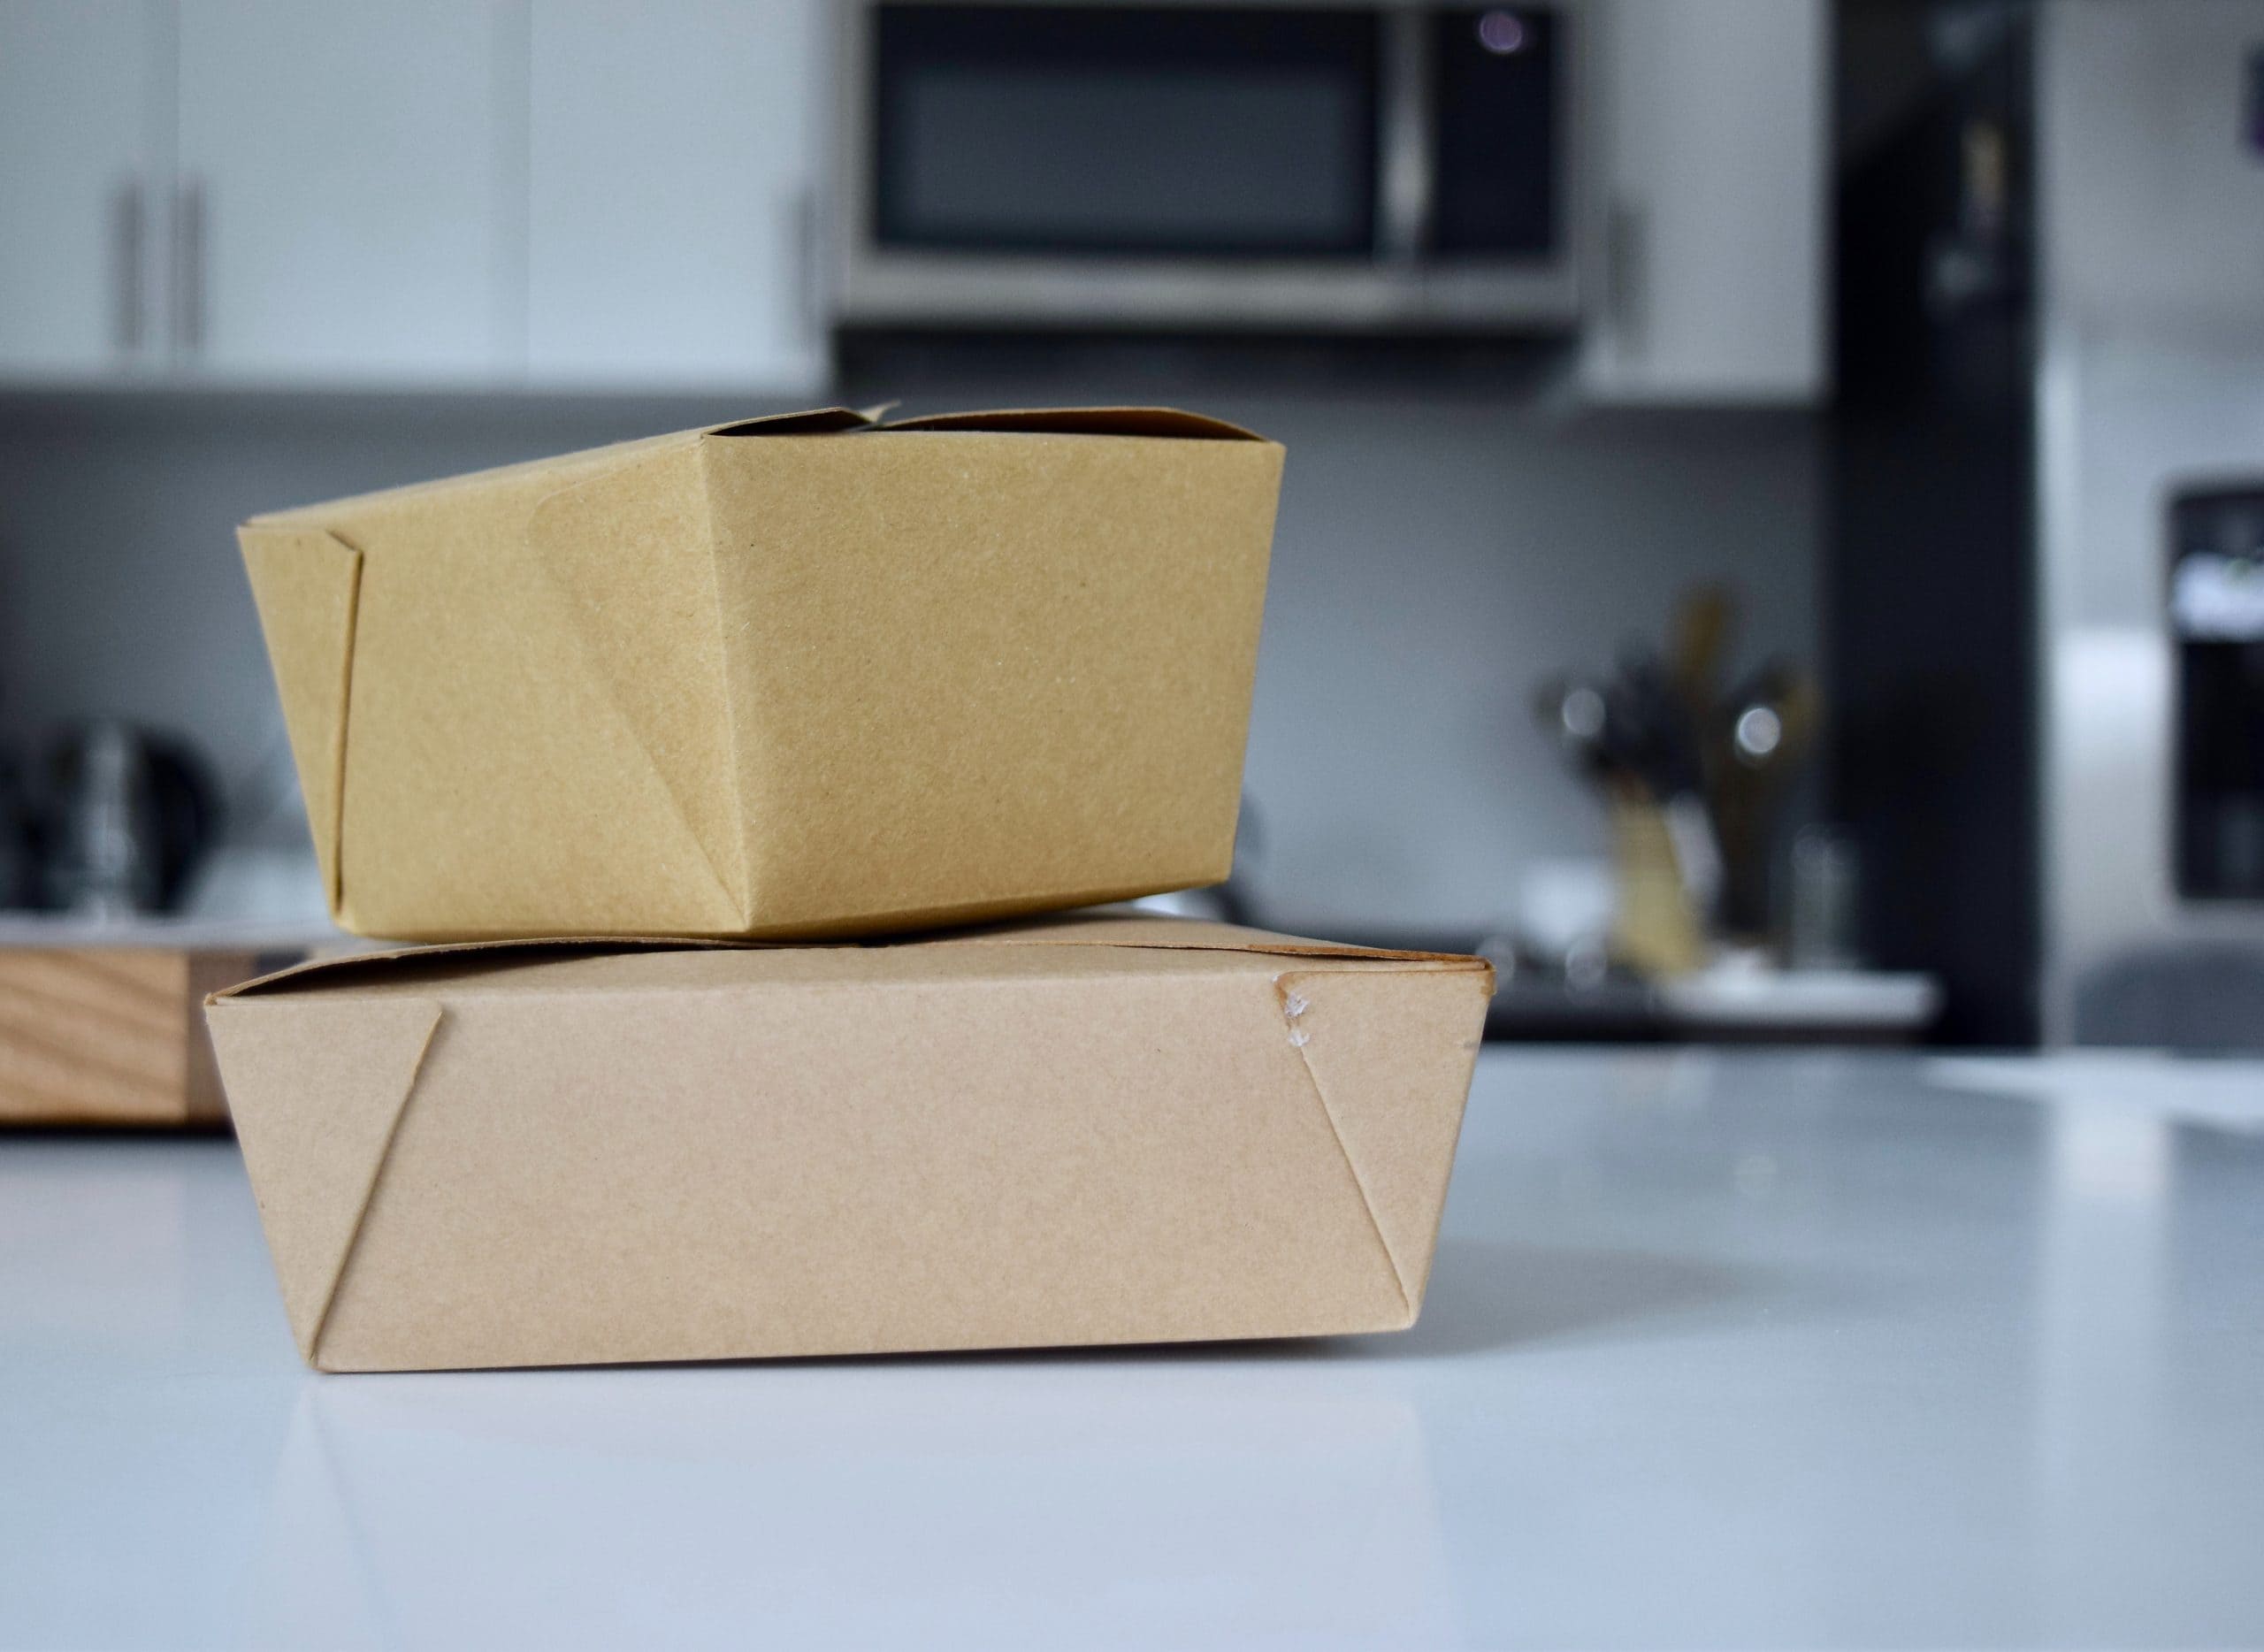 Tips for Ordering Takeout or Delivery